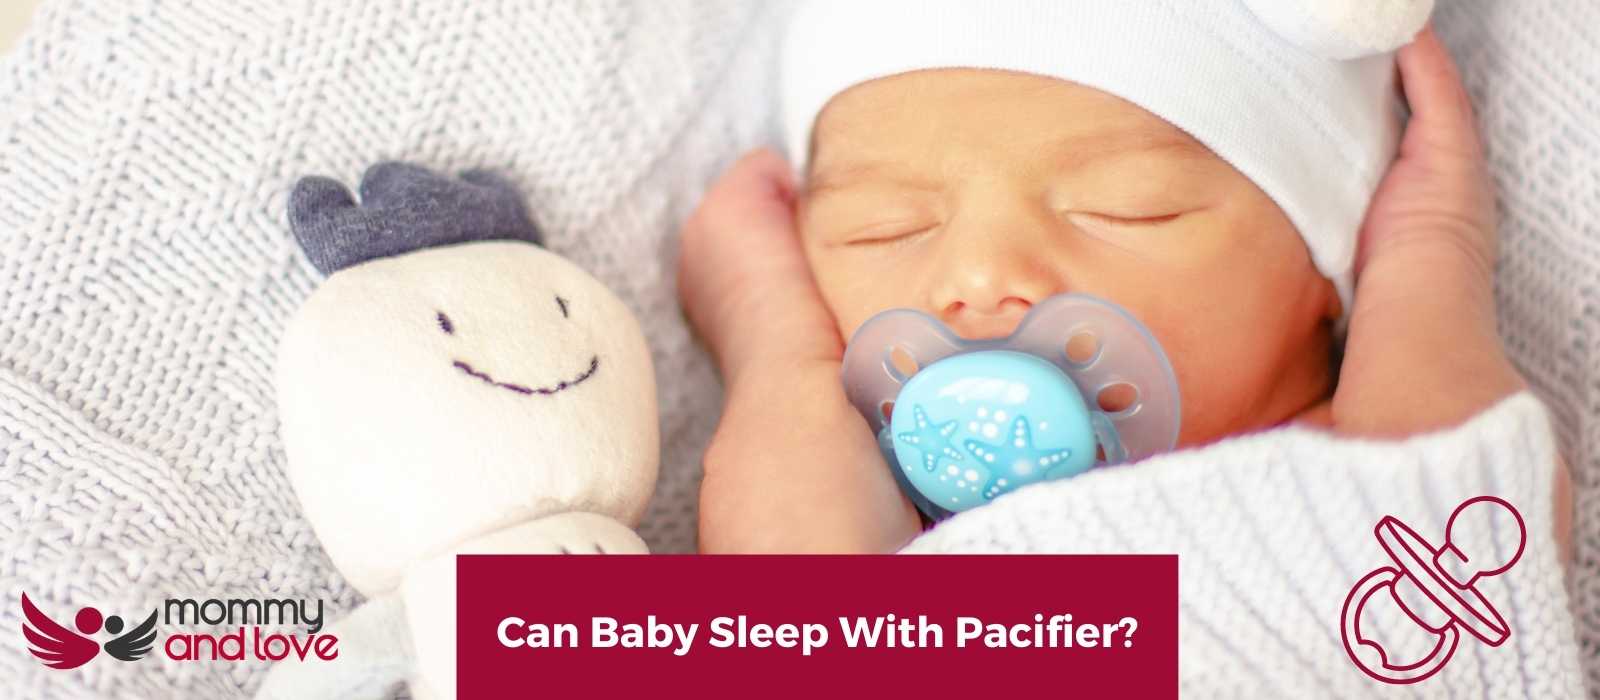 Can Baby Sleep With Pacifier